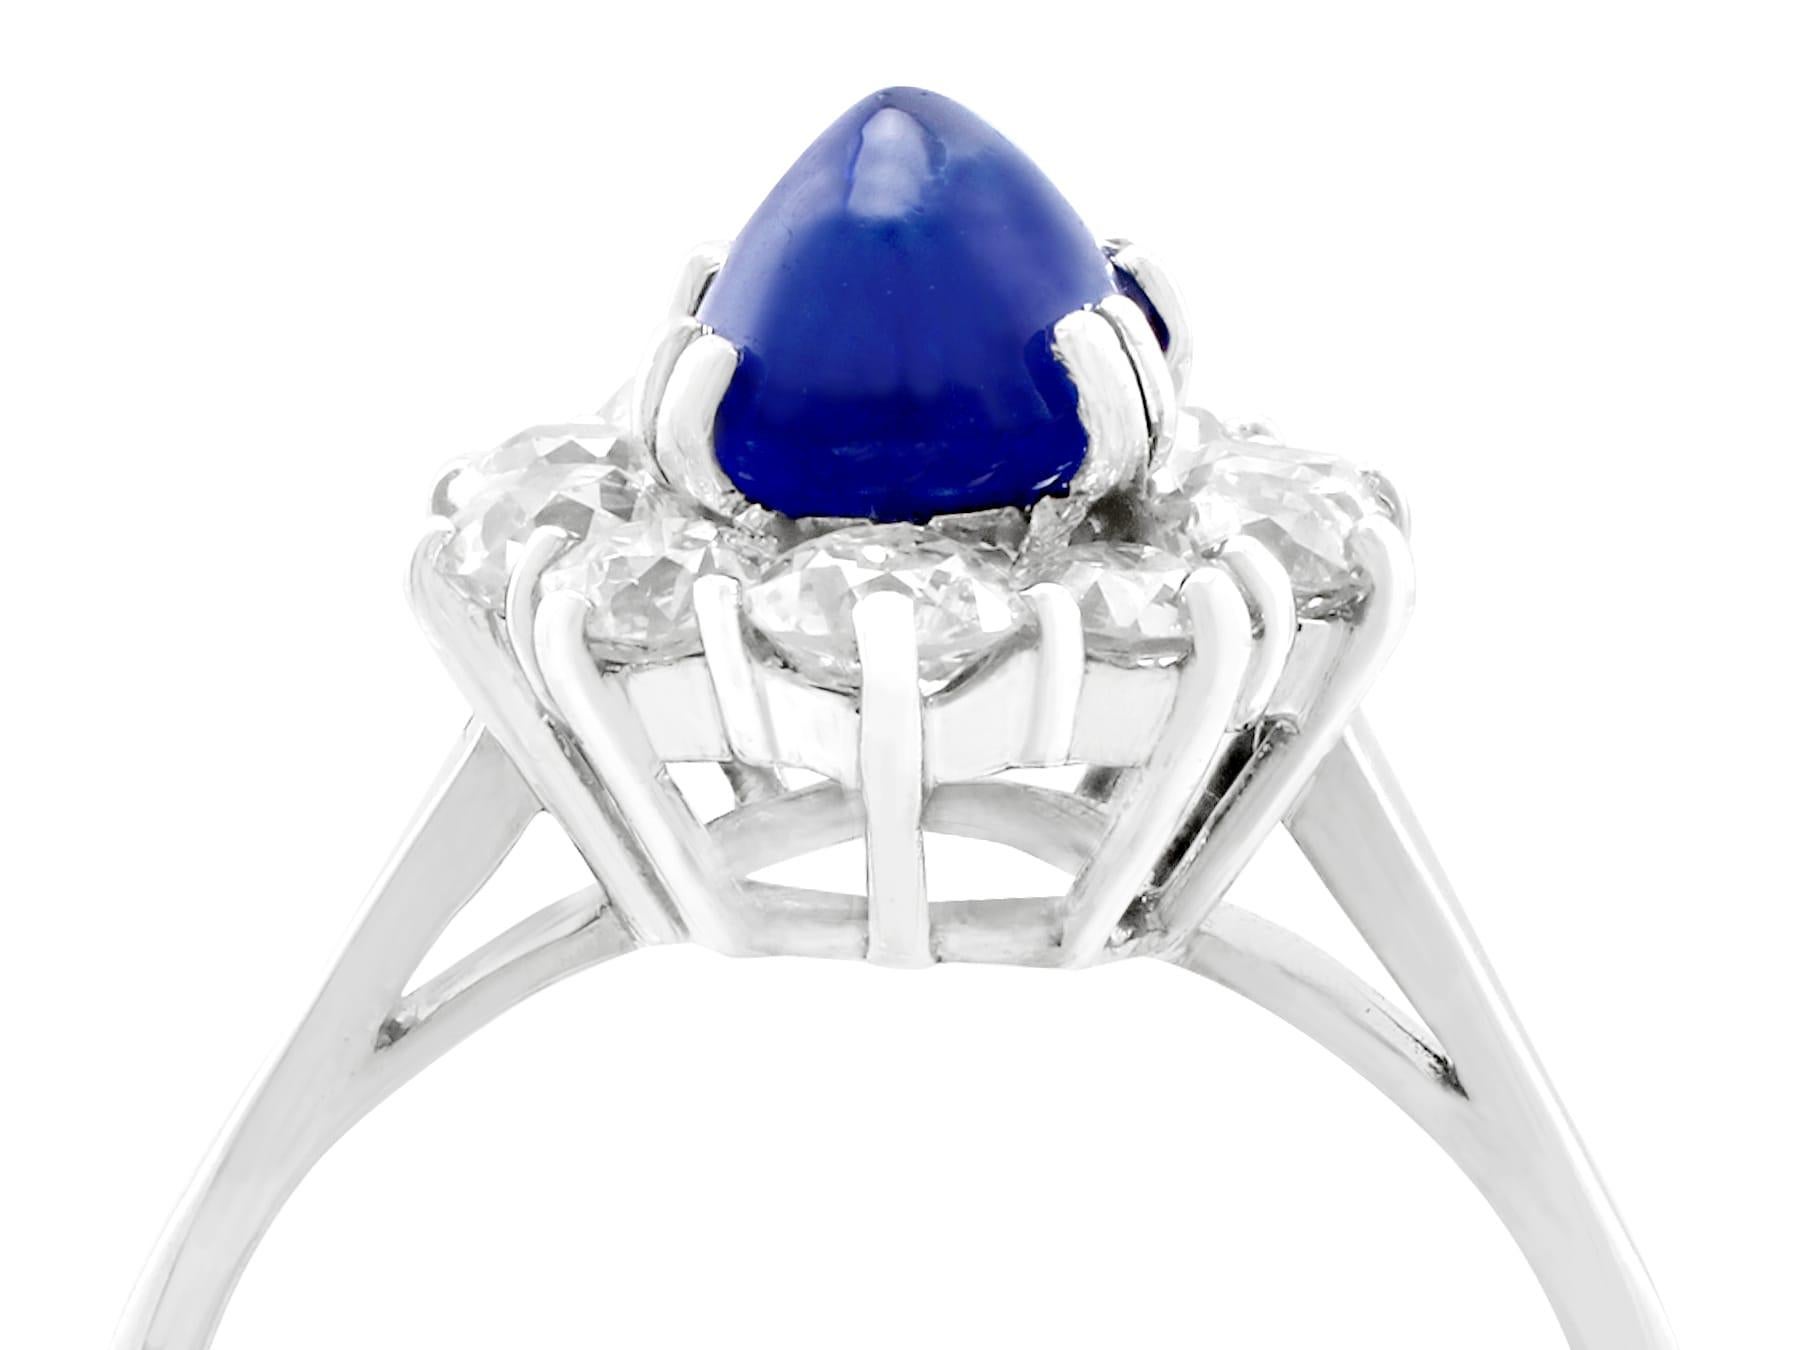 An exceptional, fine and impressive vintage 2.17 carat natural blue sapphire and 0.95 carat diamond, 18k white gold cocktail ring; part of our vintage jewelry and estate jewelry collections.

This exceptional, fine and impressive cabochon cut